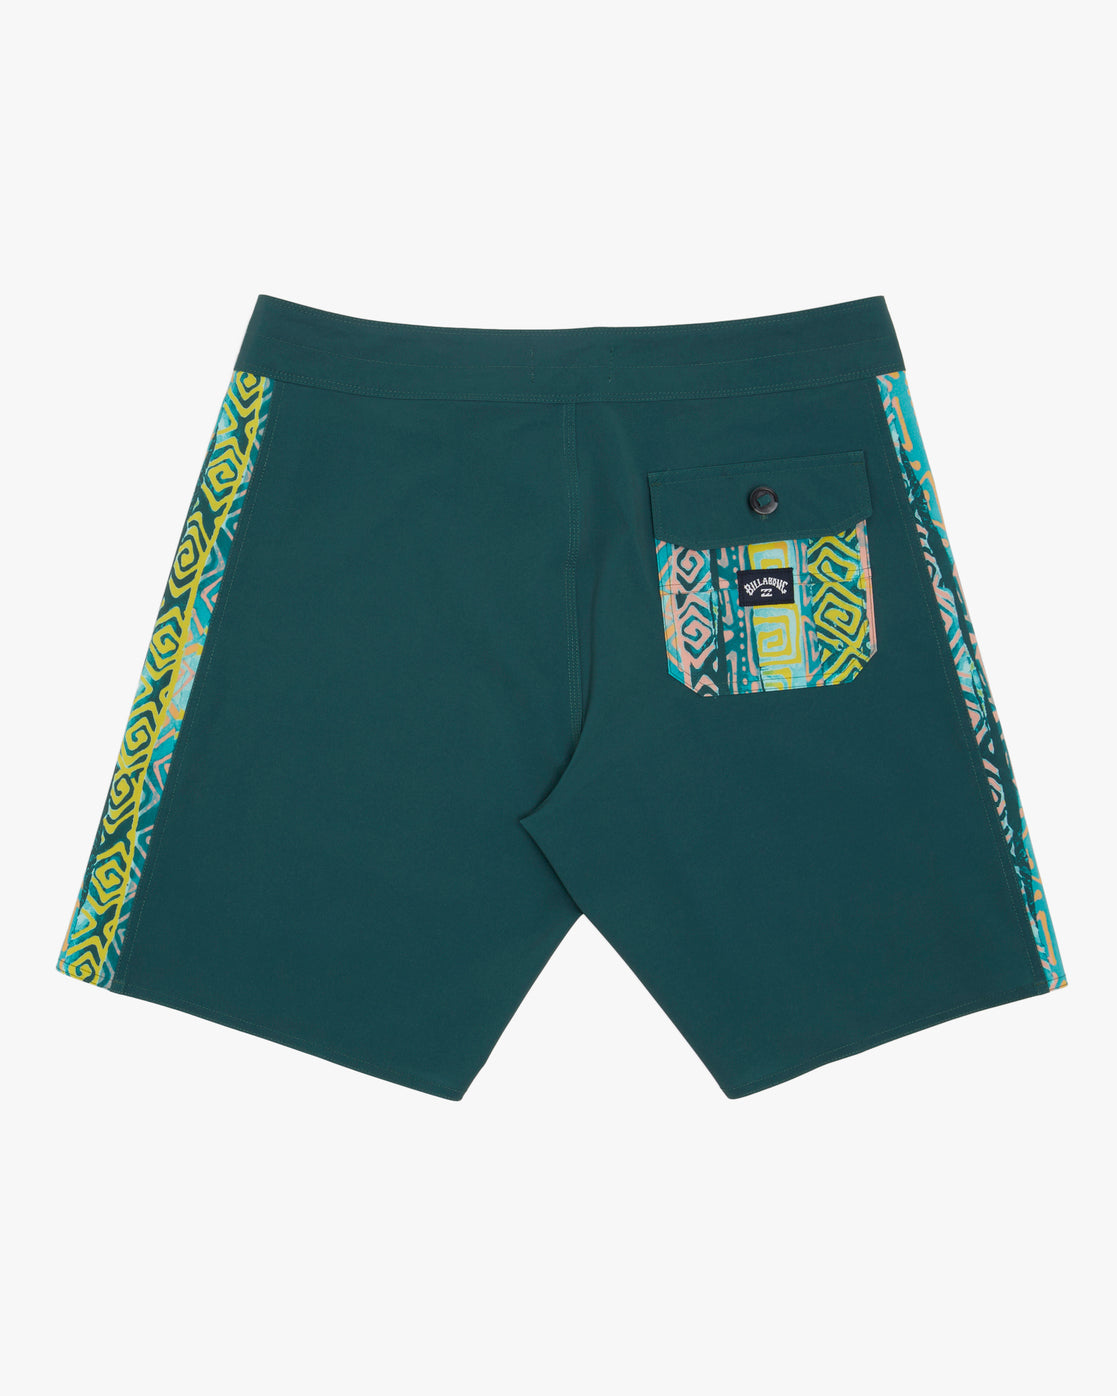 D Bah Ciclo Pro Performance 18" Boardshorts - Cypress